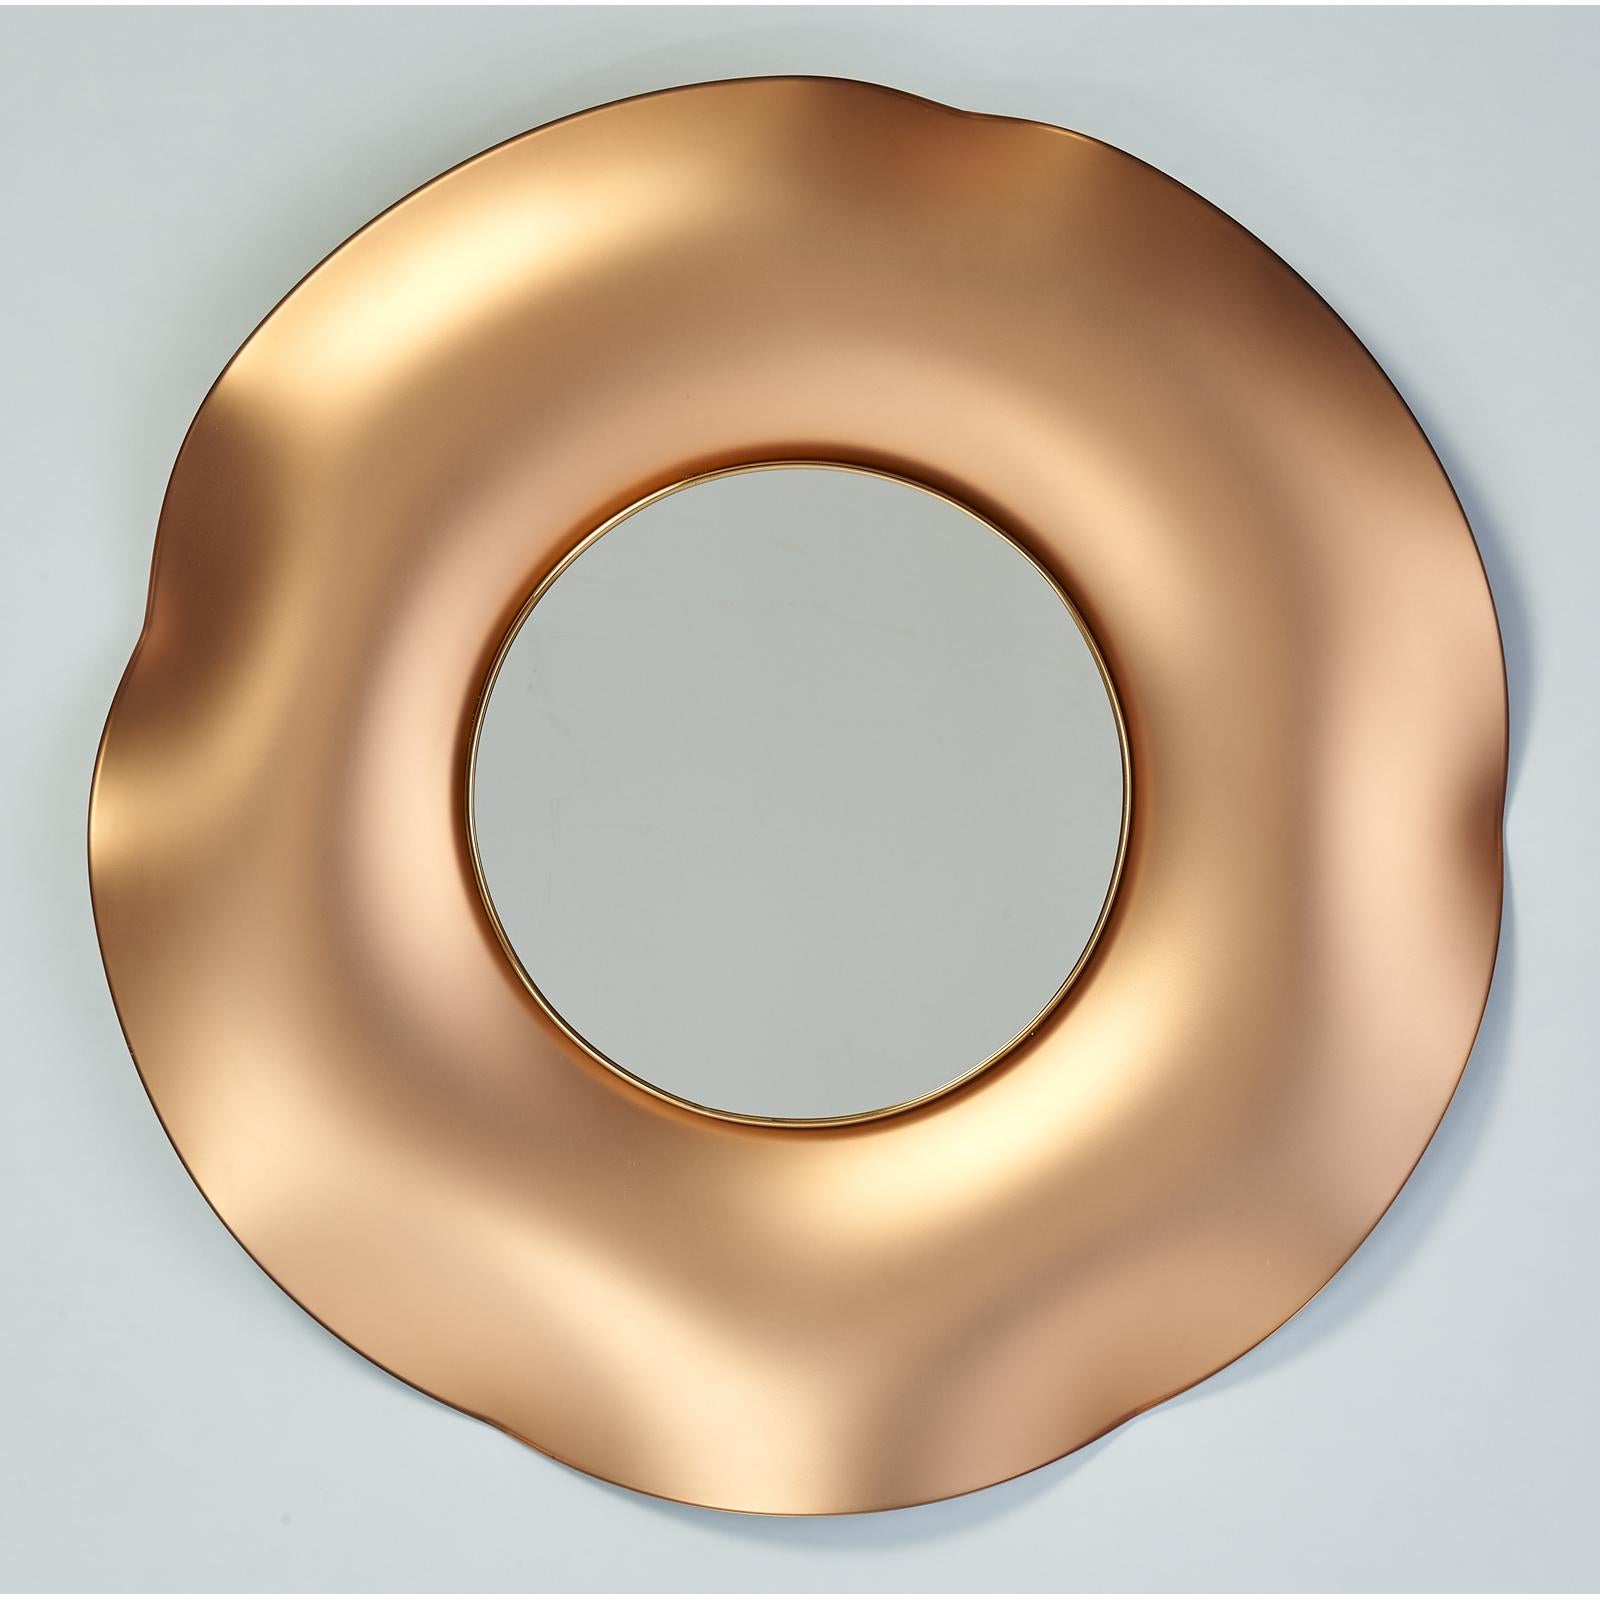 Ghiro Studio Undulating Mirror in Solid Colored Glass, 2018 In New Condition For Sale In New York, NY